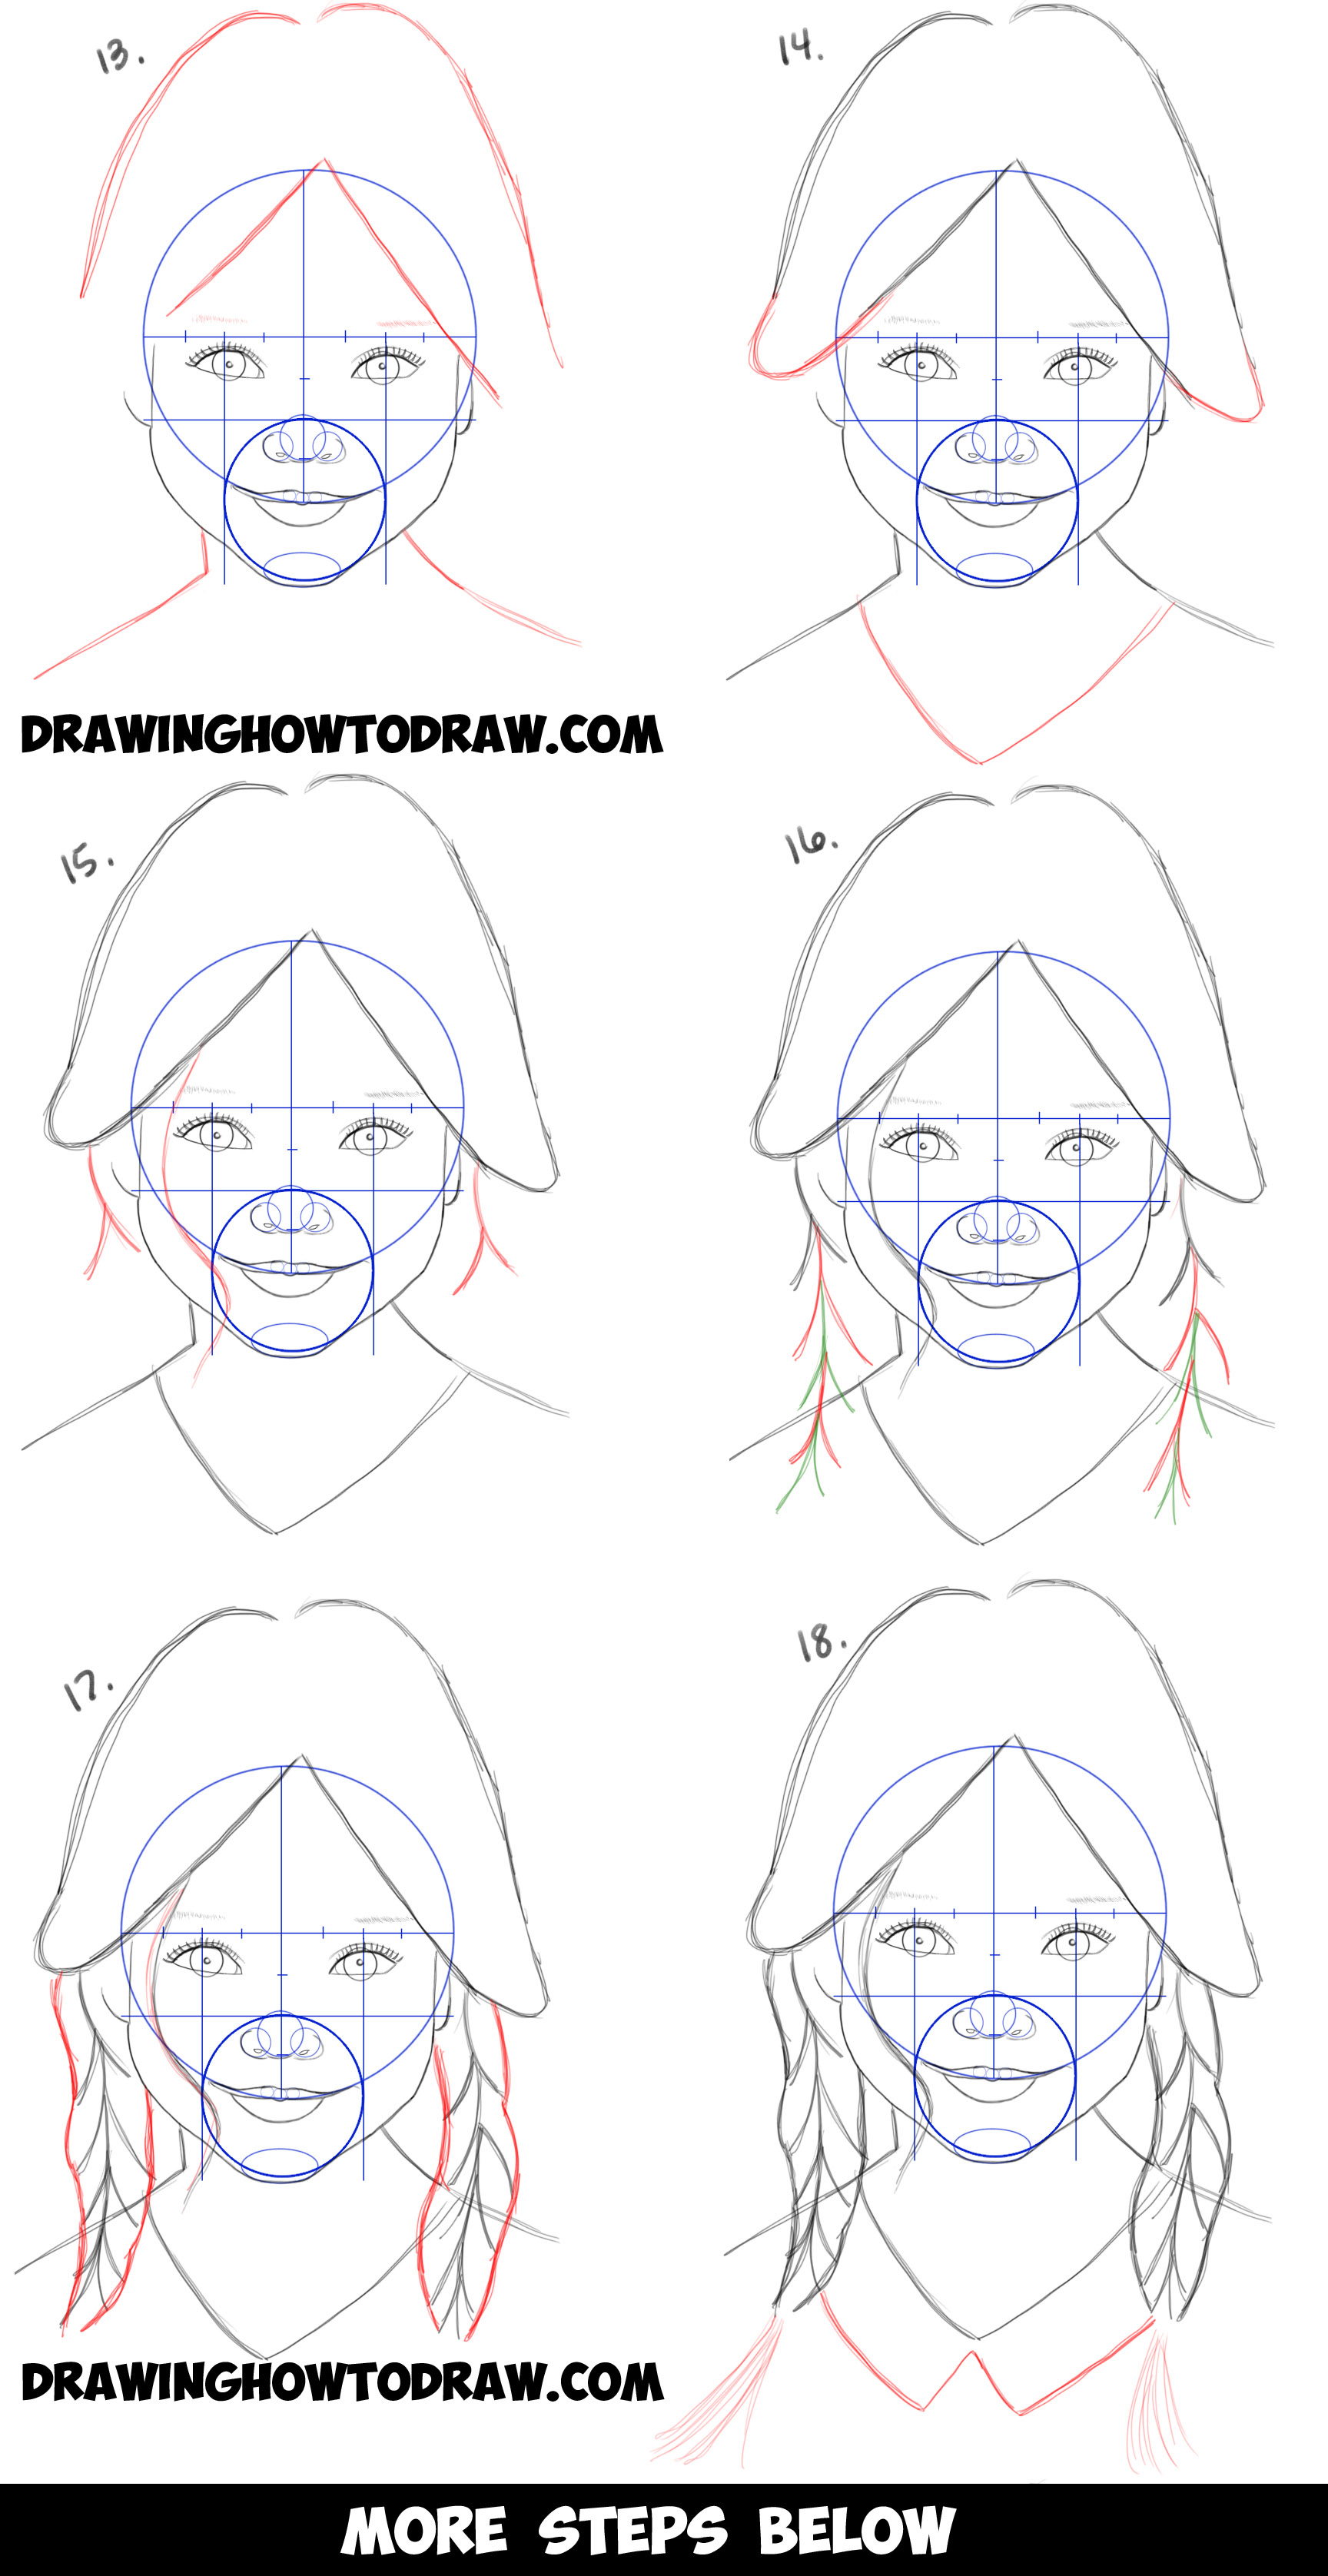 https://www.drawinghowtodraw.com/stepbystepdrawinglessons/wp-content/uploads/2017/11/how-to-draw-a-realistic-little-girls-face-head-braids-easy-step-by-step-drawing-tutorial-for-beginners-portrait2.jpg